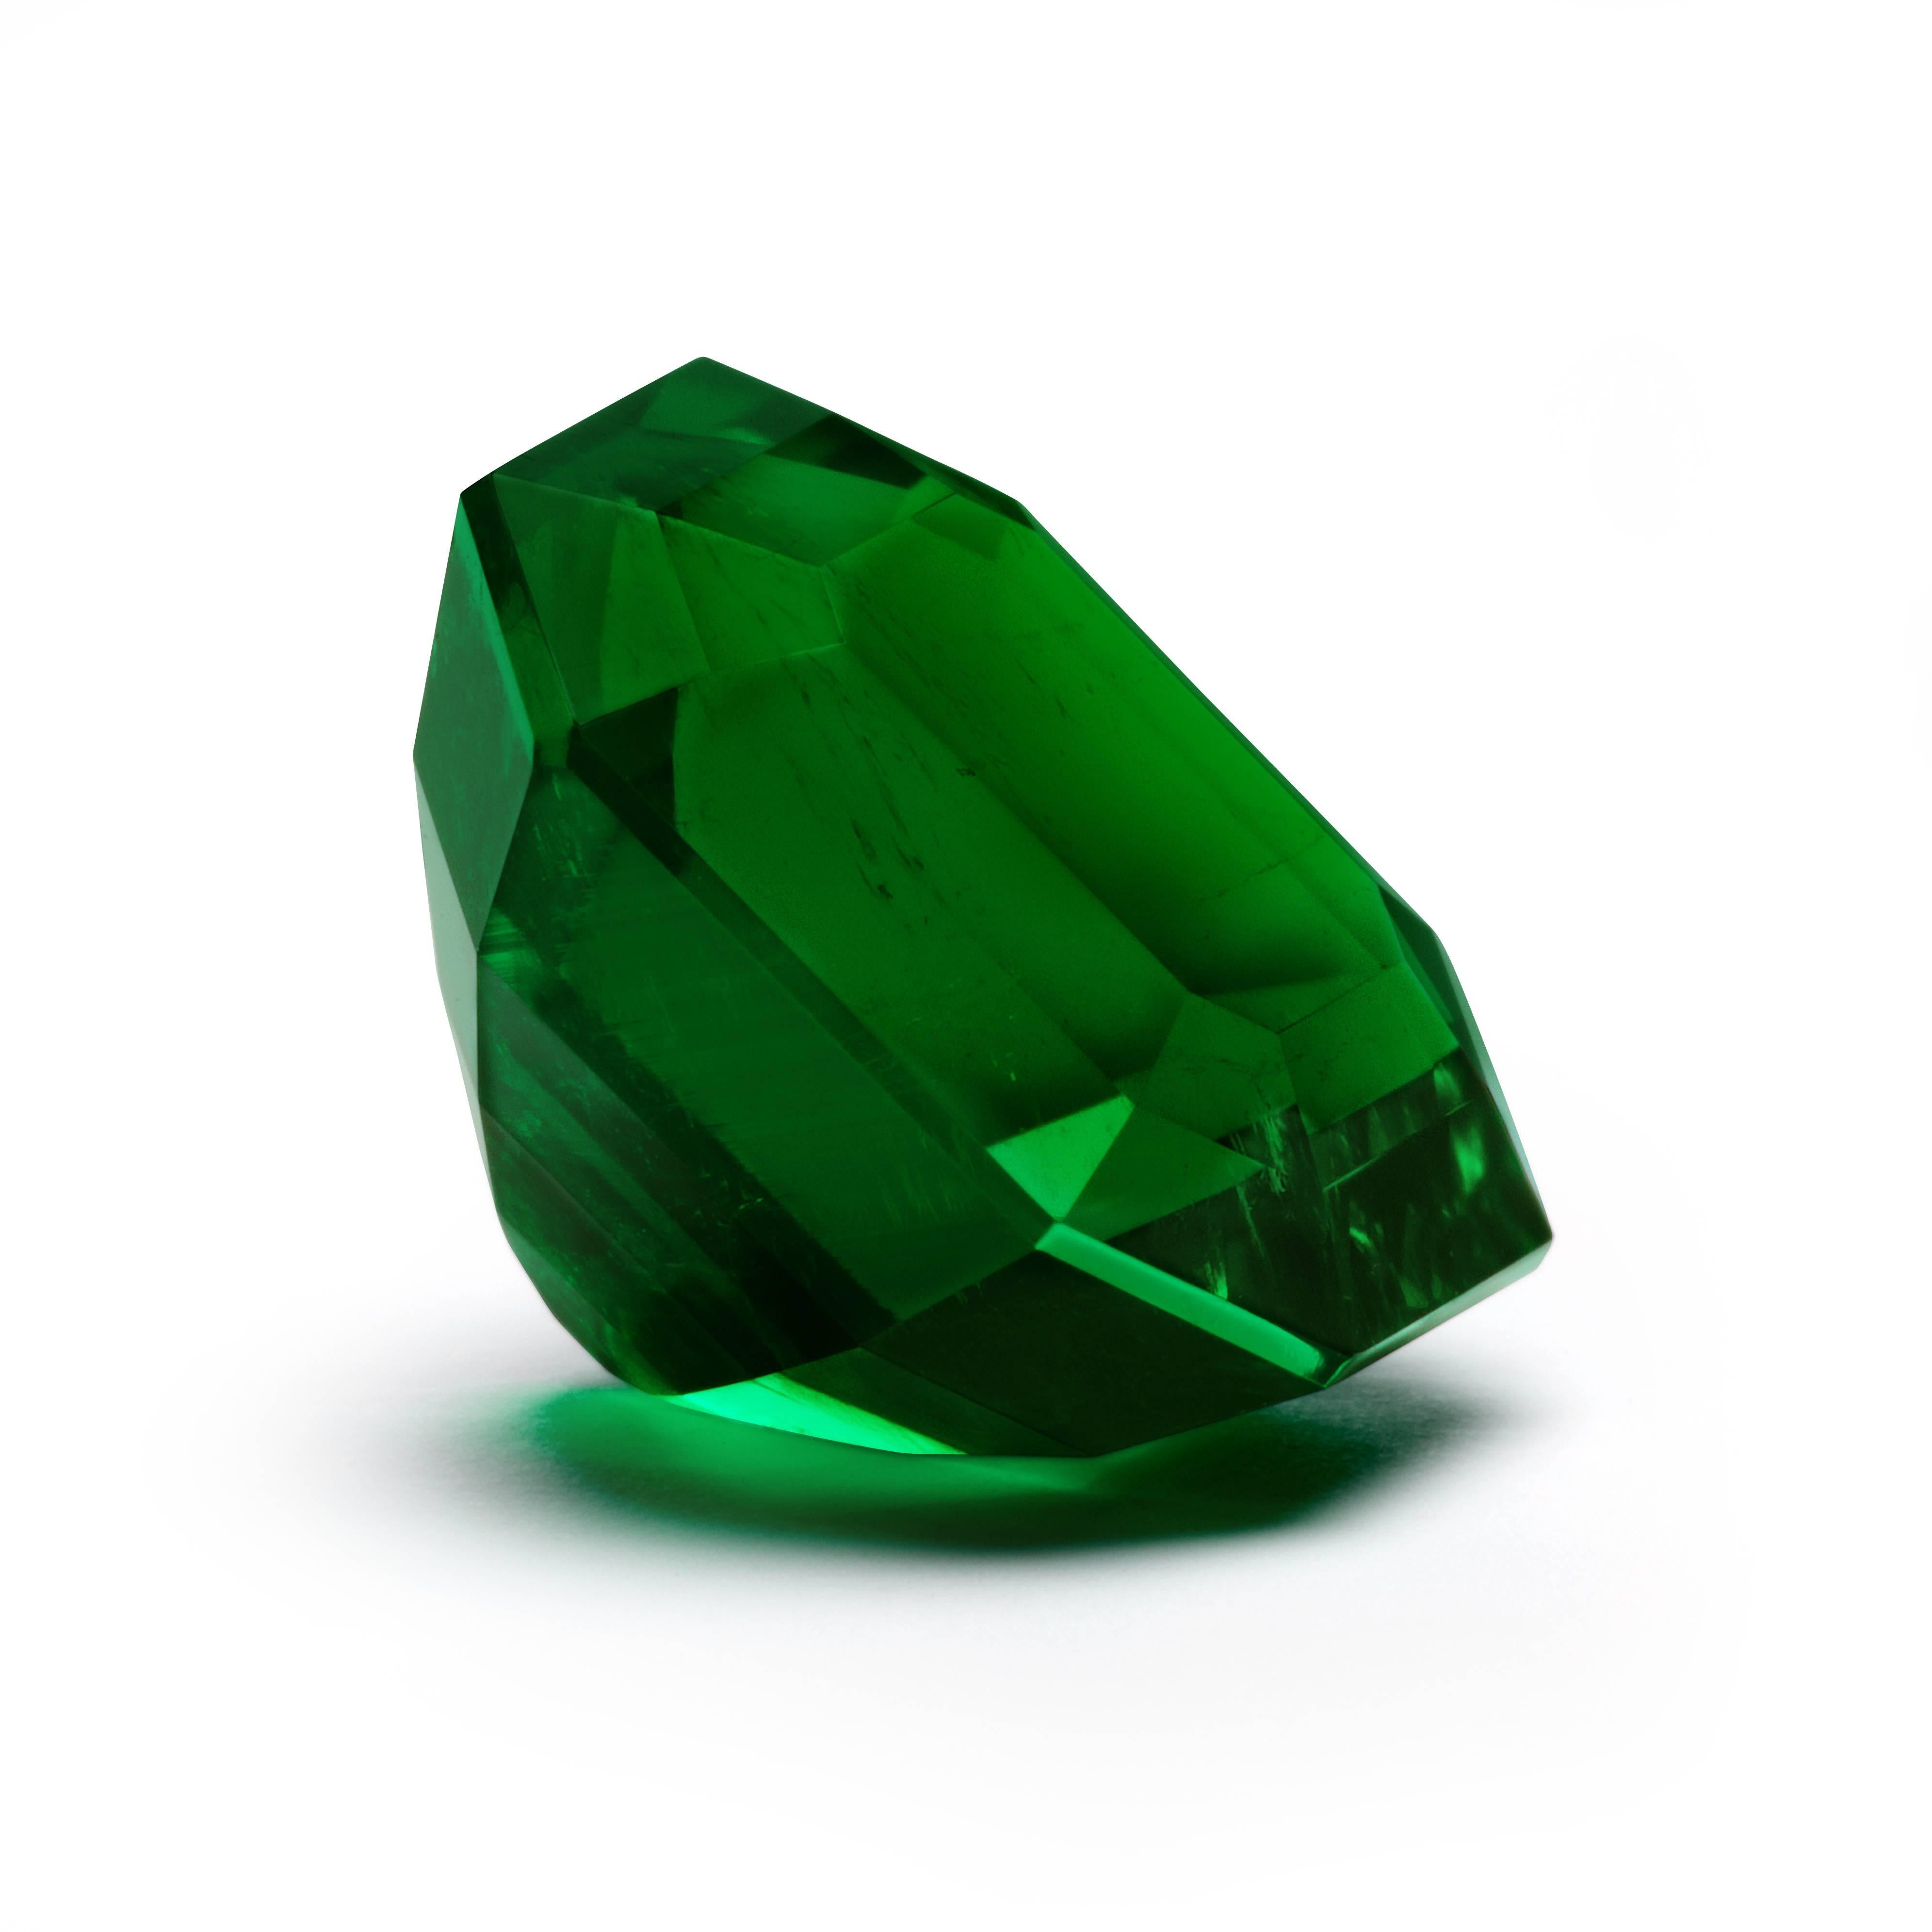 An ultra fine 5.21ct Colombian Emerald. This rare treasure is superior in color and clarity and would make a heirloom-quality jewelry creation.
Accompanied by the notable Gubelin gem laboratory certificate.